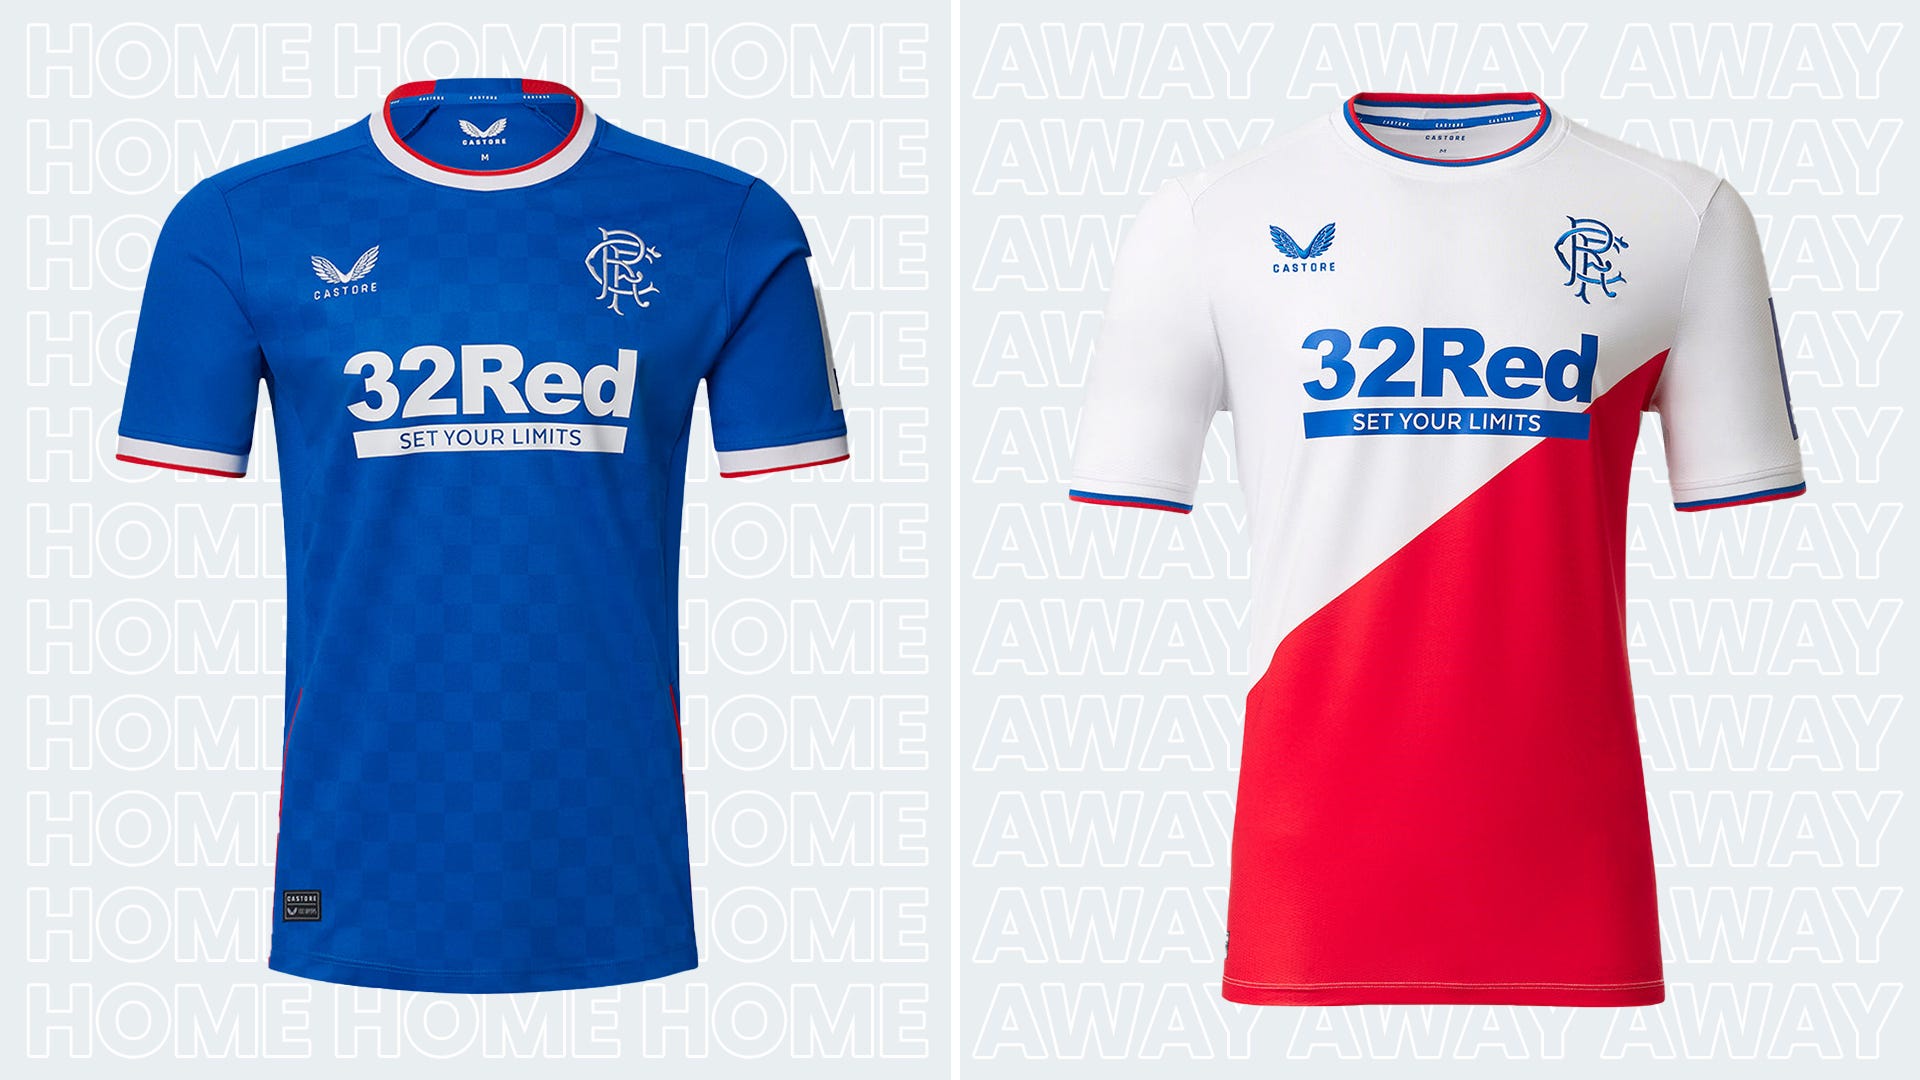 Rangers unveil new home kit designed by Castore for 2020/21 season